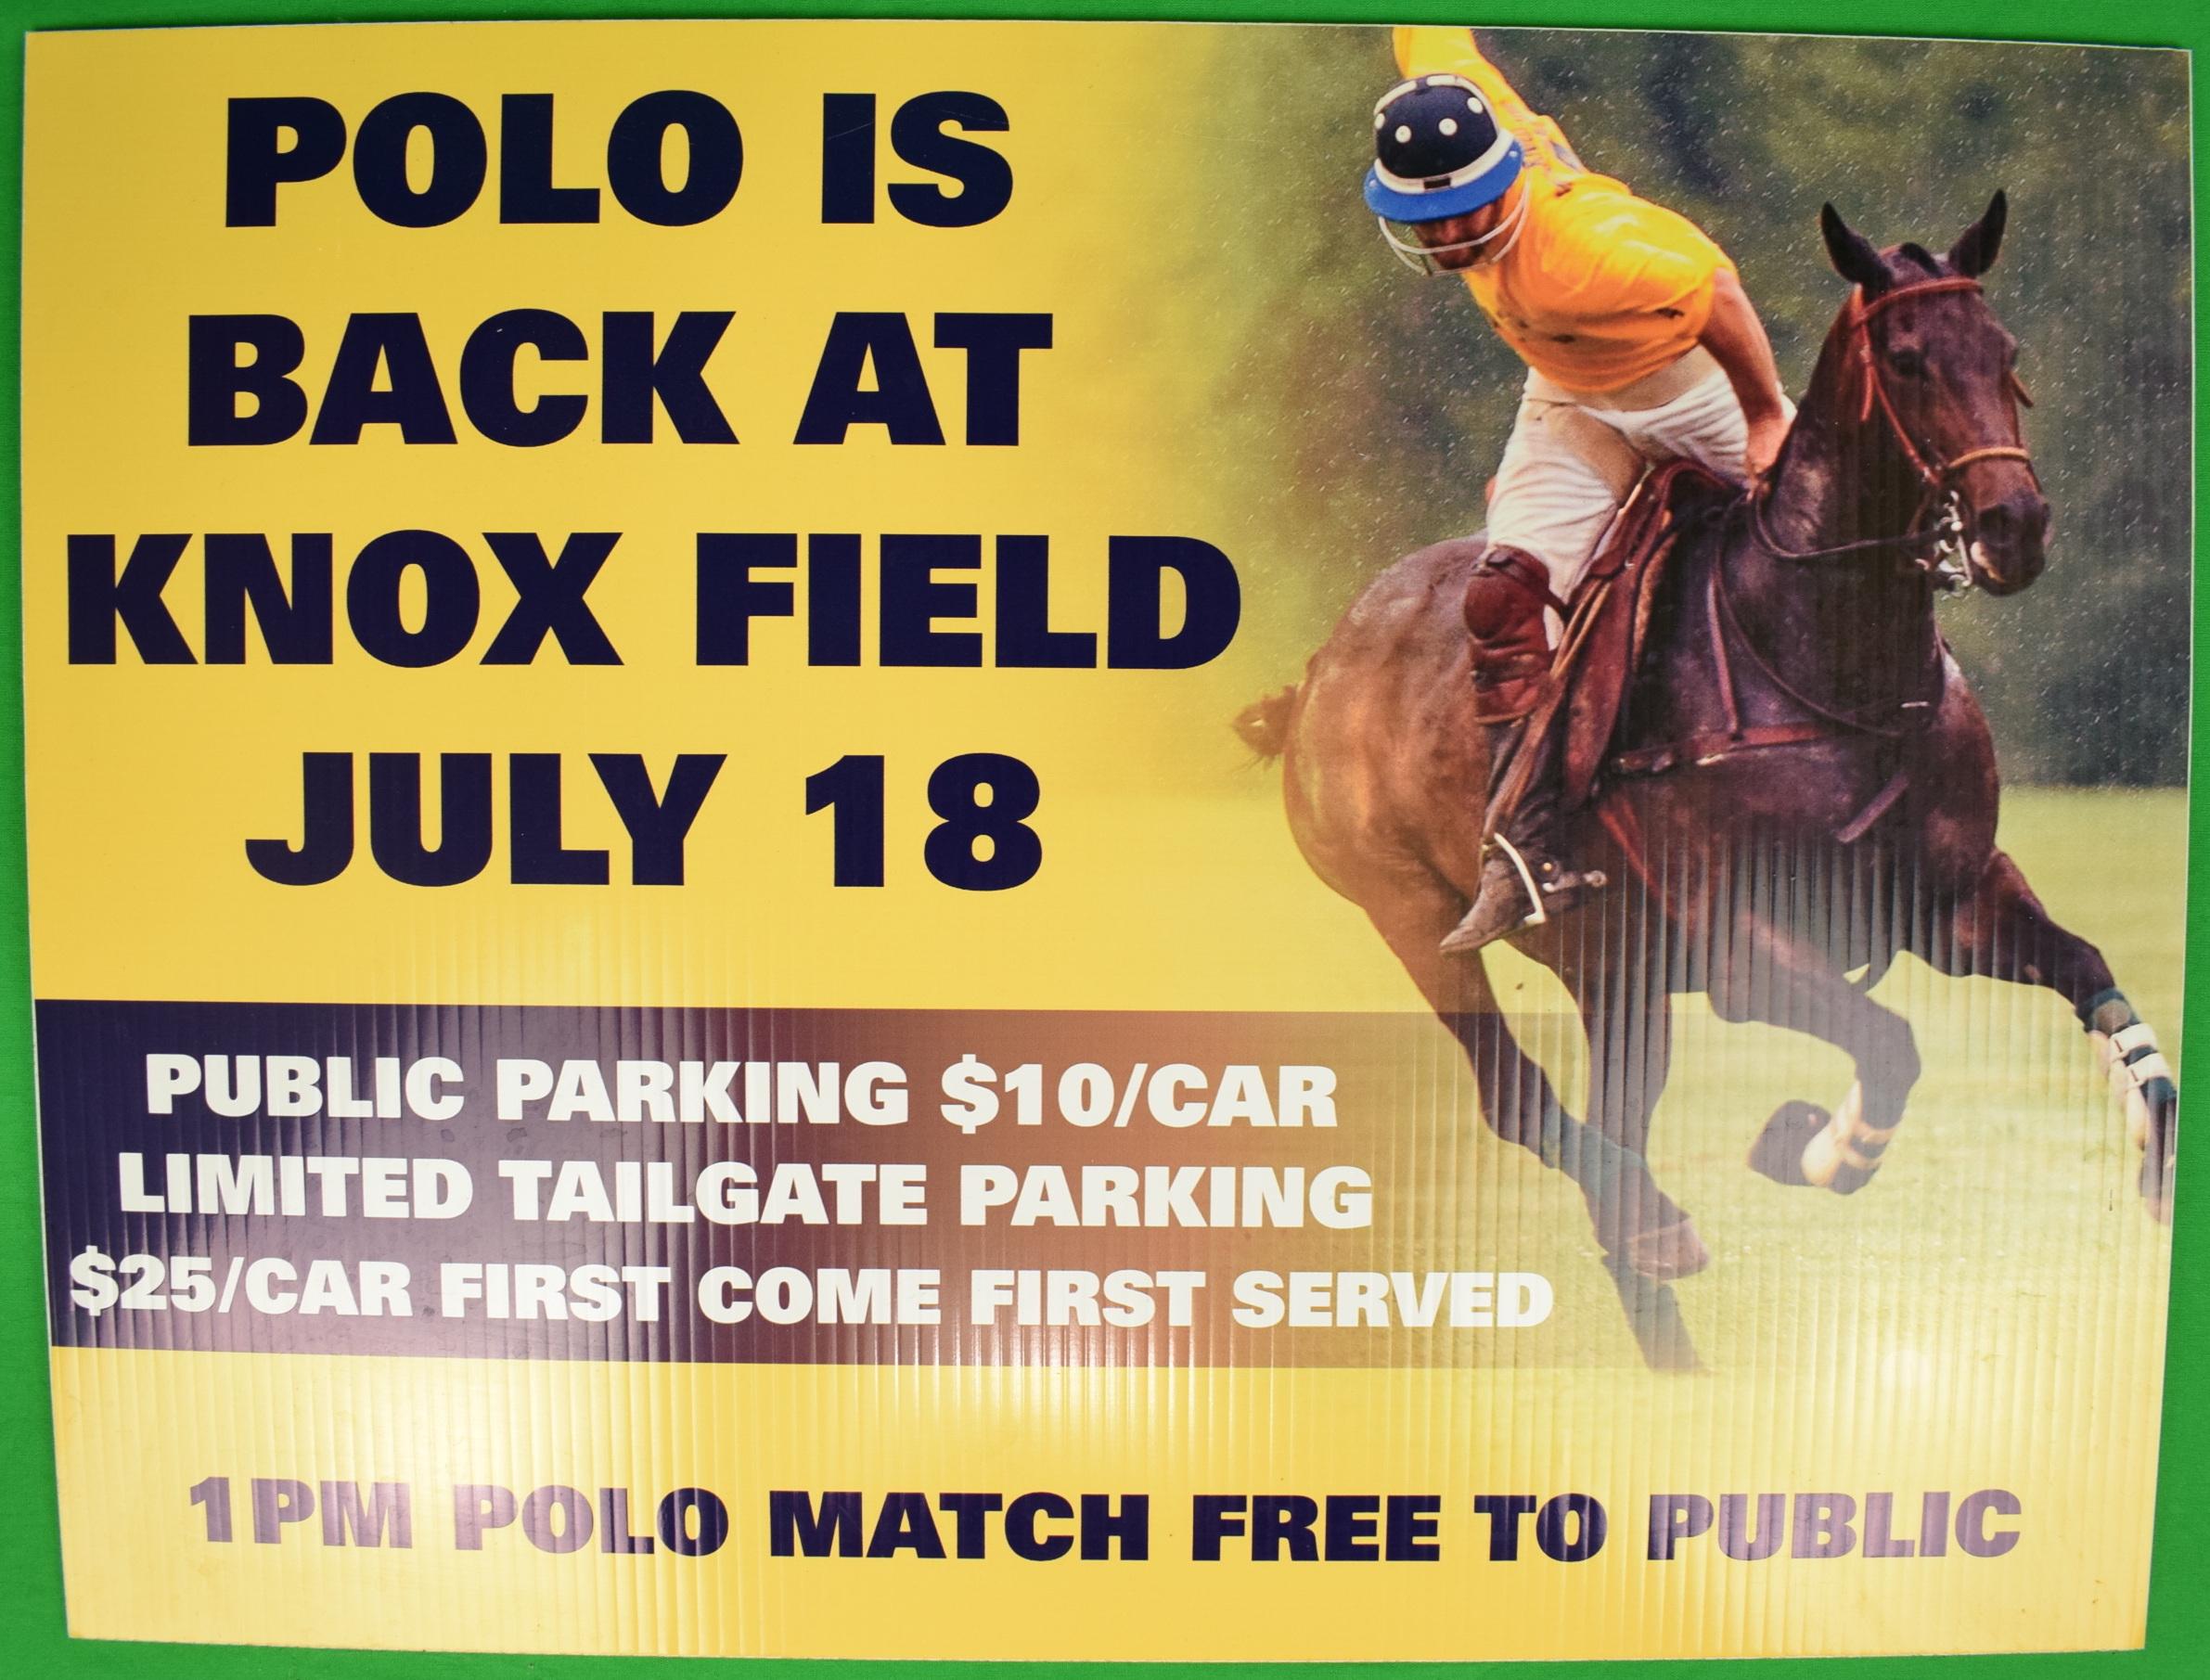 Polo Is Back At Knox Field July 18 Sign - Art by Unknown